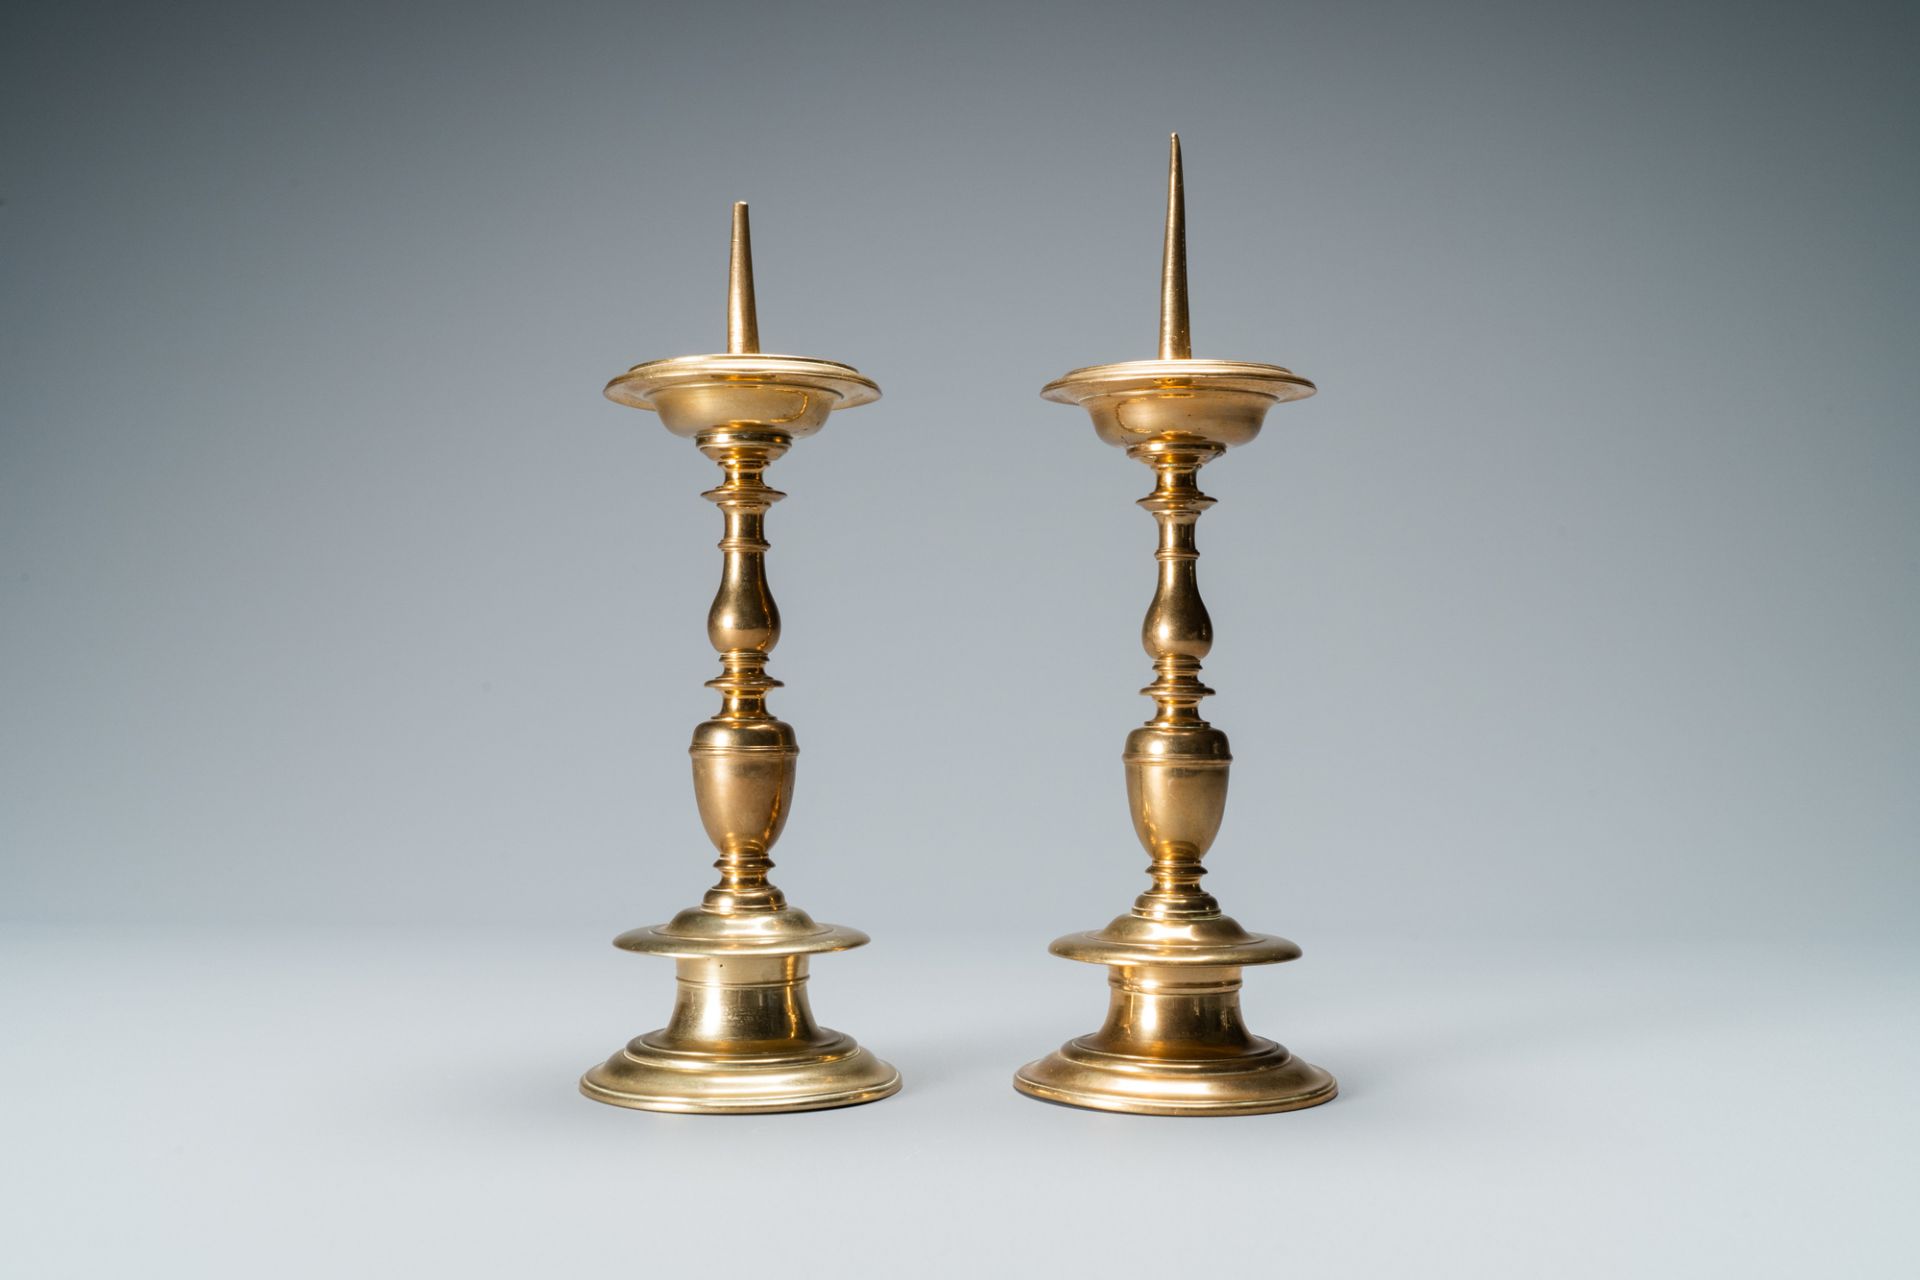 A pair of brass alloy candlesticks, Italy, 17th C. - Image 2 of 7